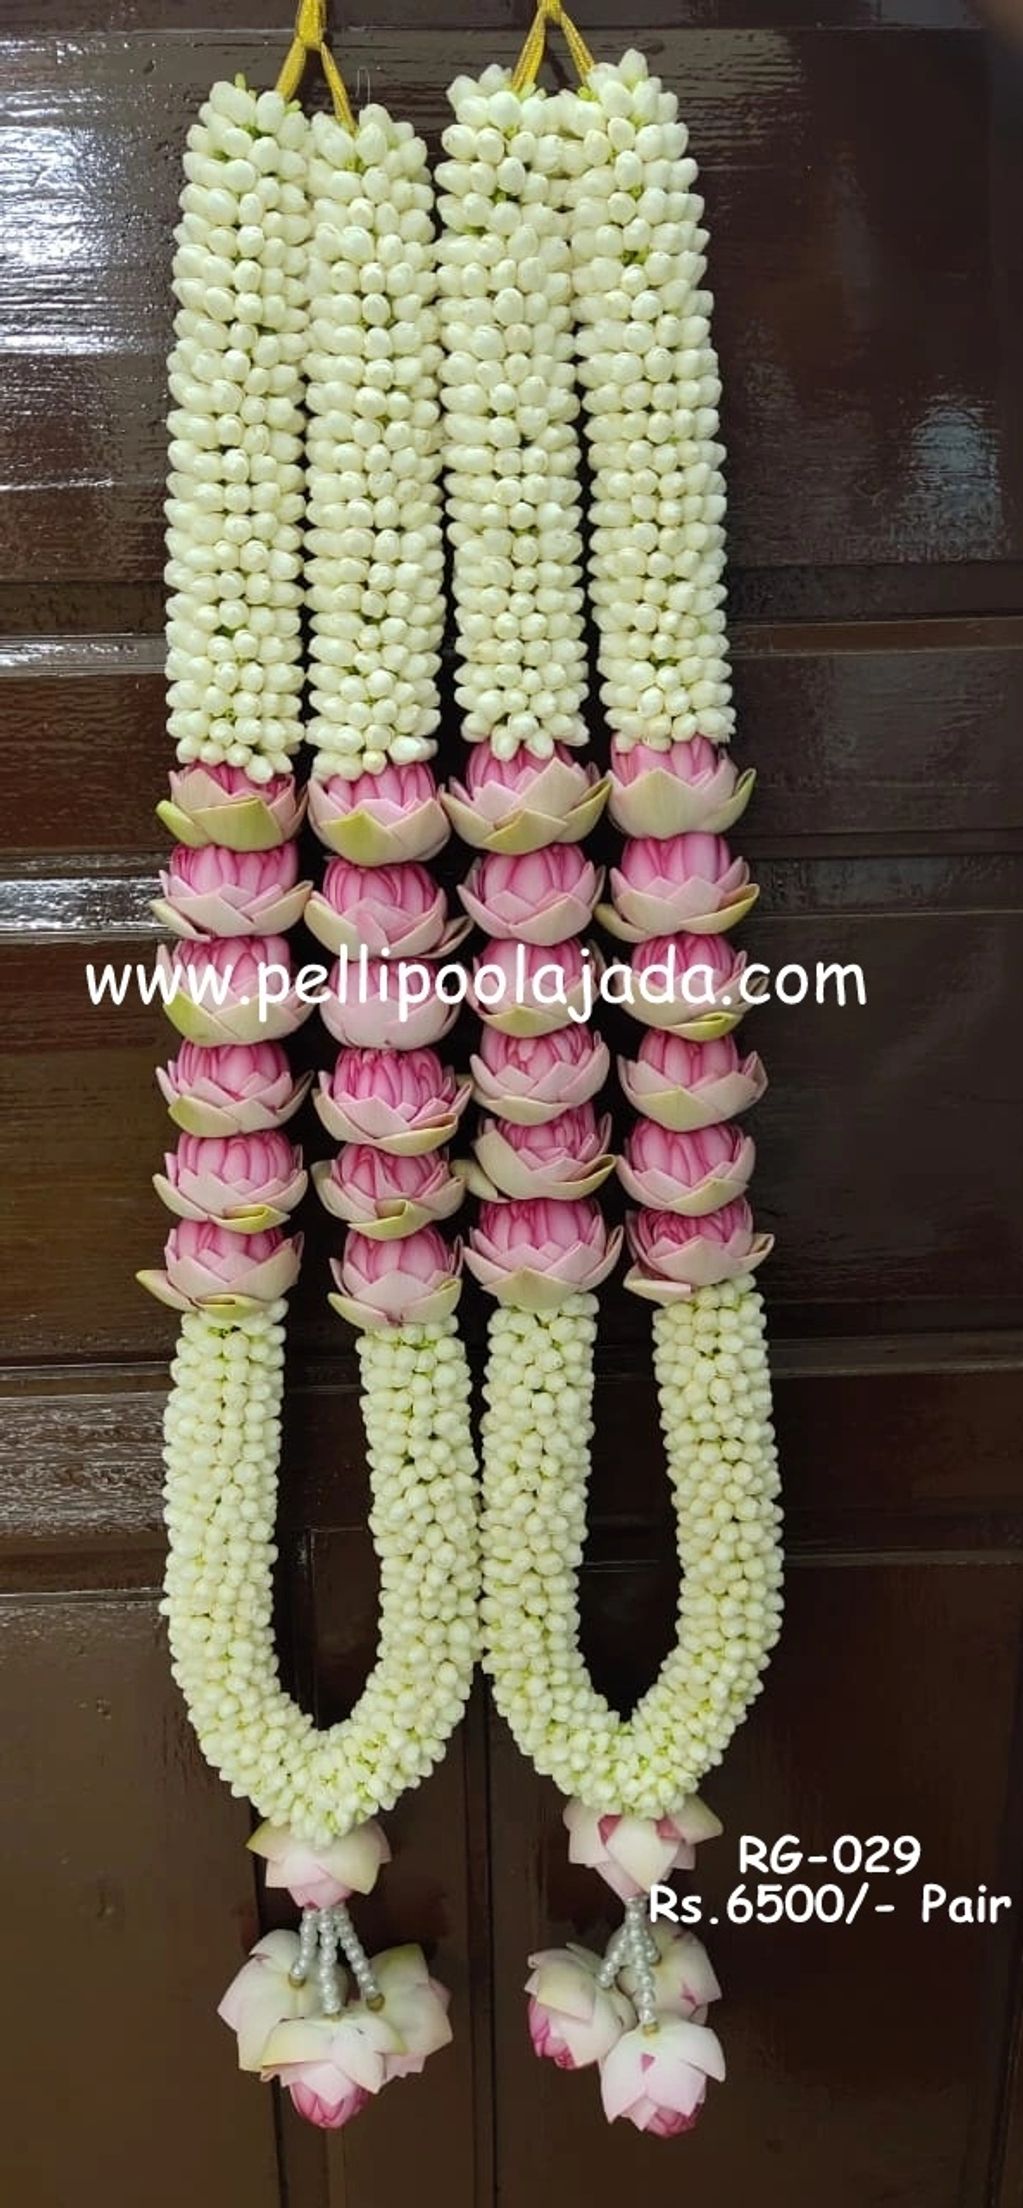 Lotus and Bombay Malli garlands for wedding by Vizag Pelli poolajada branch